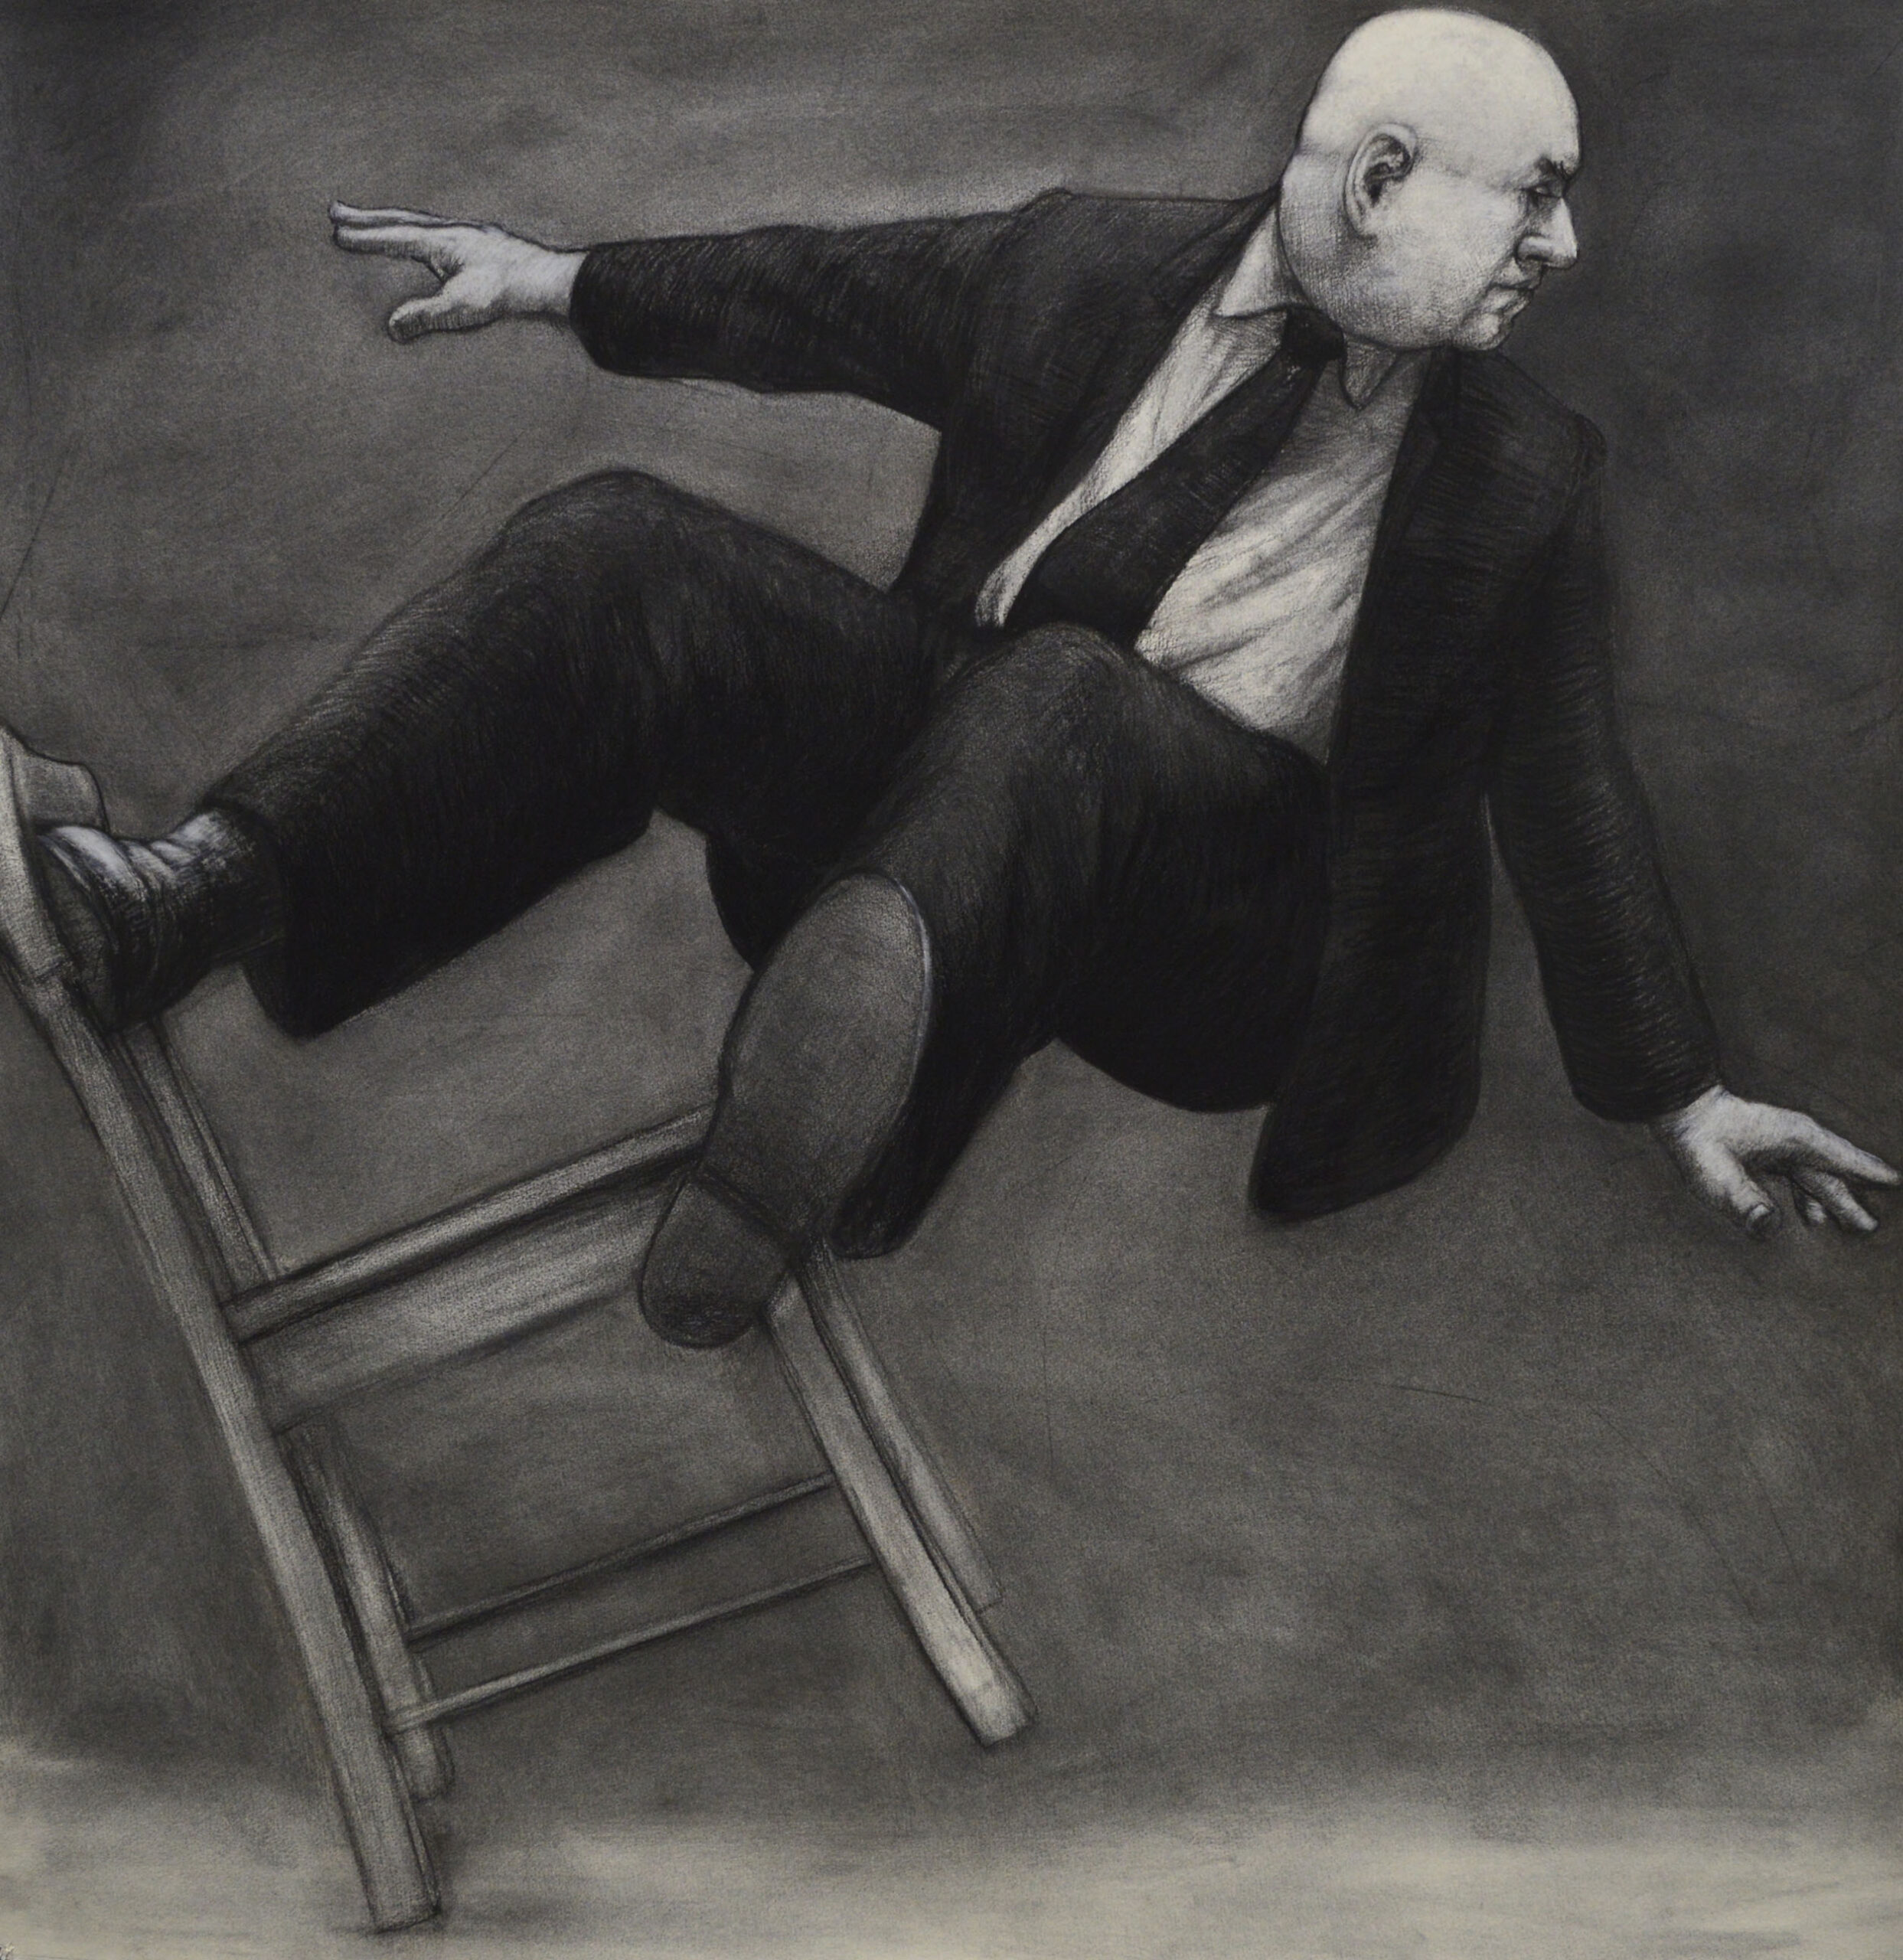 Orchard-Precarious 3-charcoal on paper-100 x 100cm-Master